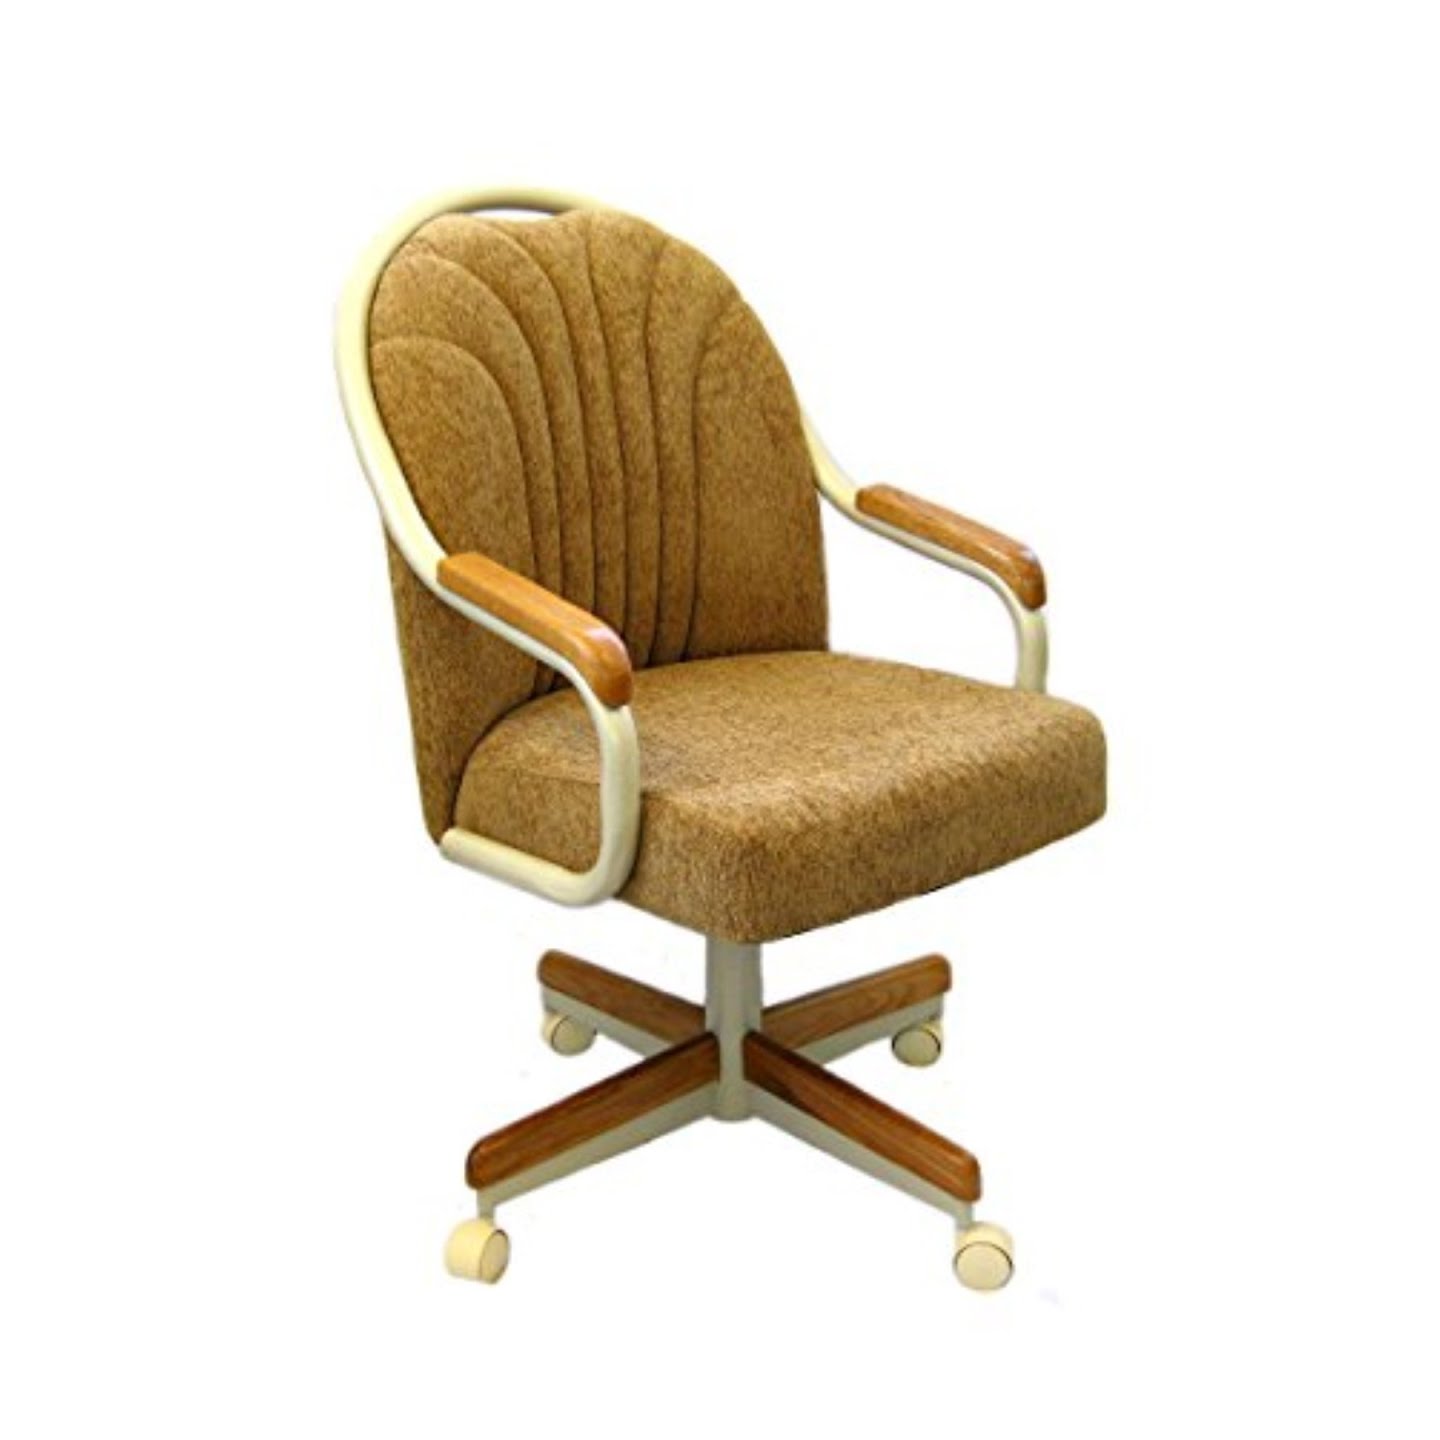 Dining Chairs With Casters Visualhunt, Kitchen Chairs With Casters And Arms